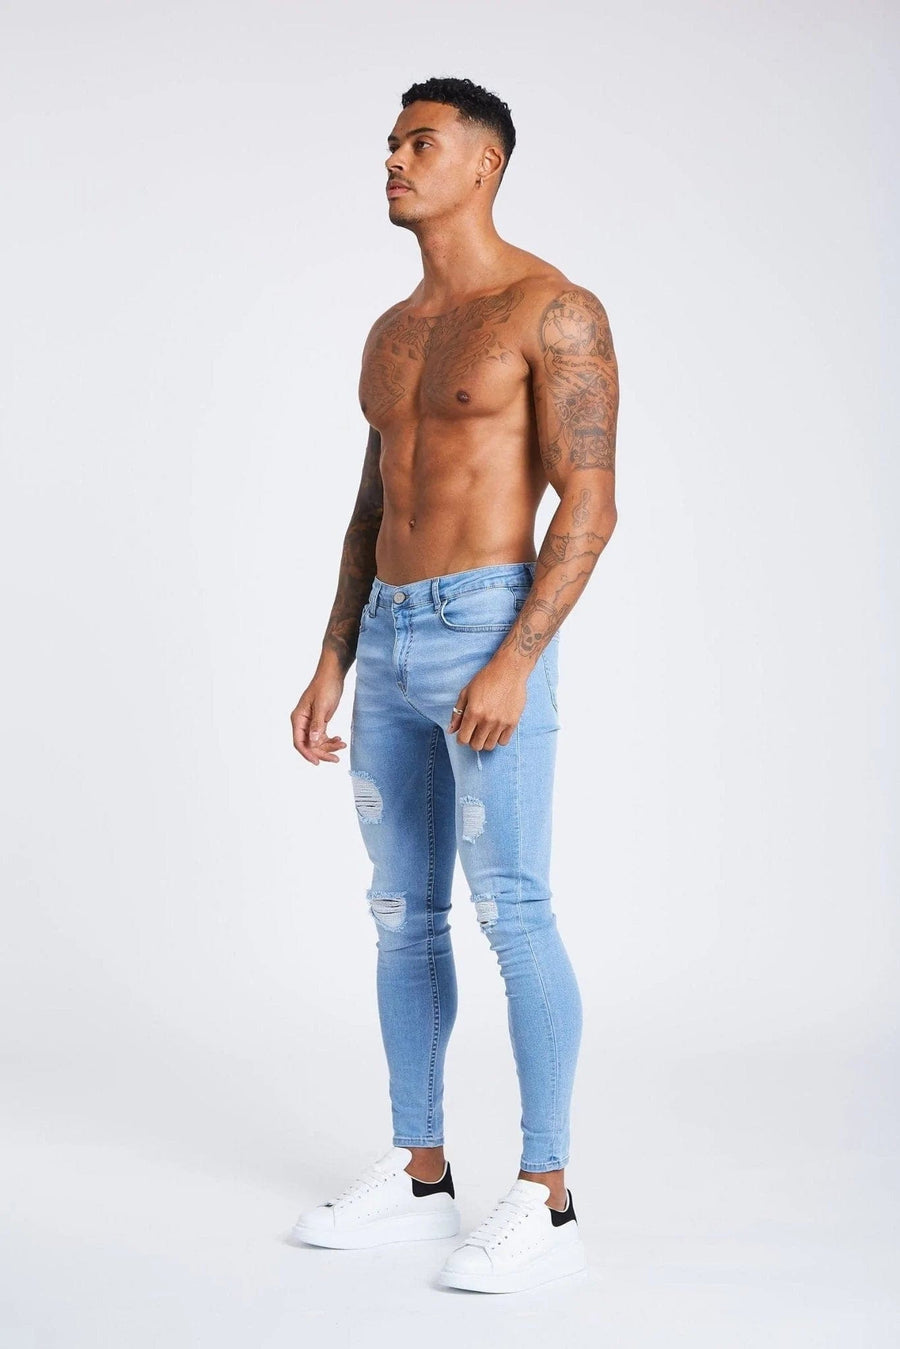 Legend London Jeans Light Blue Jeans - Ripped & Repaired